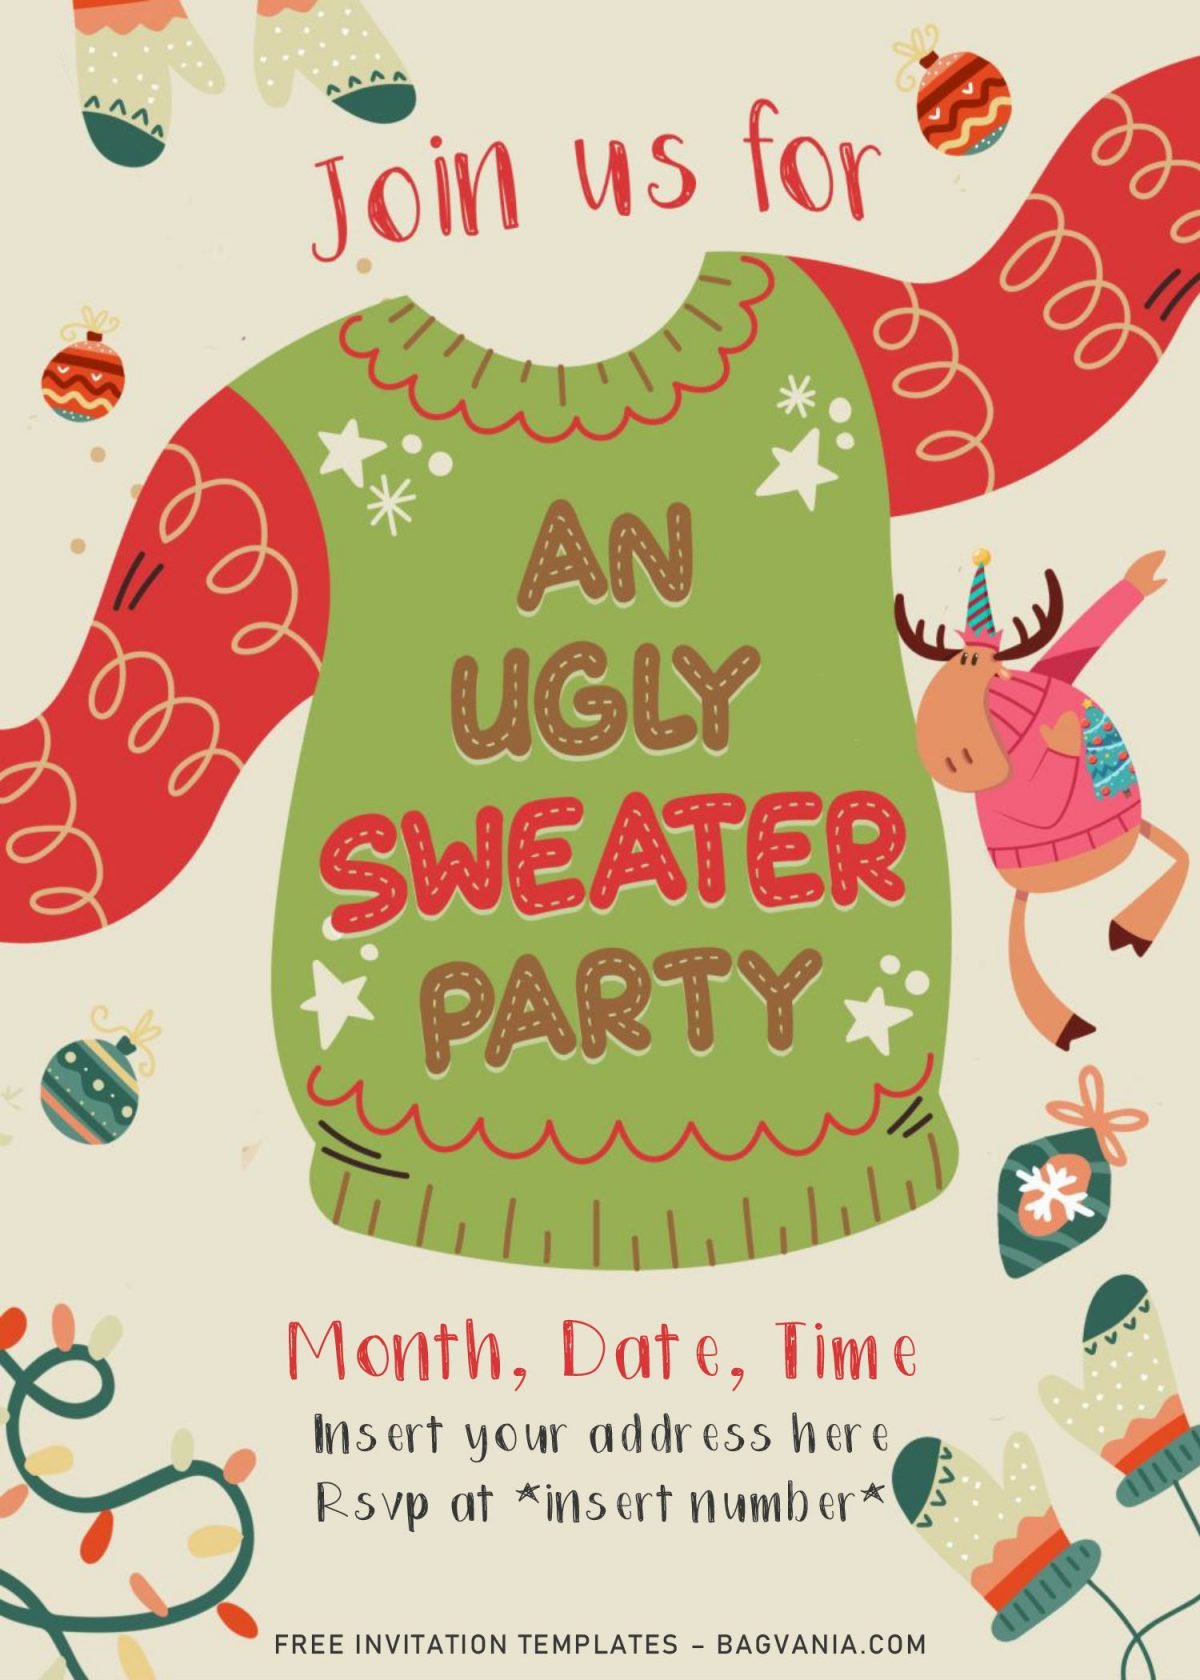 Free Winter Ugly Sweater Birthday Party Invitation Templates For Word and has dabbing deer and Christmas ornaments